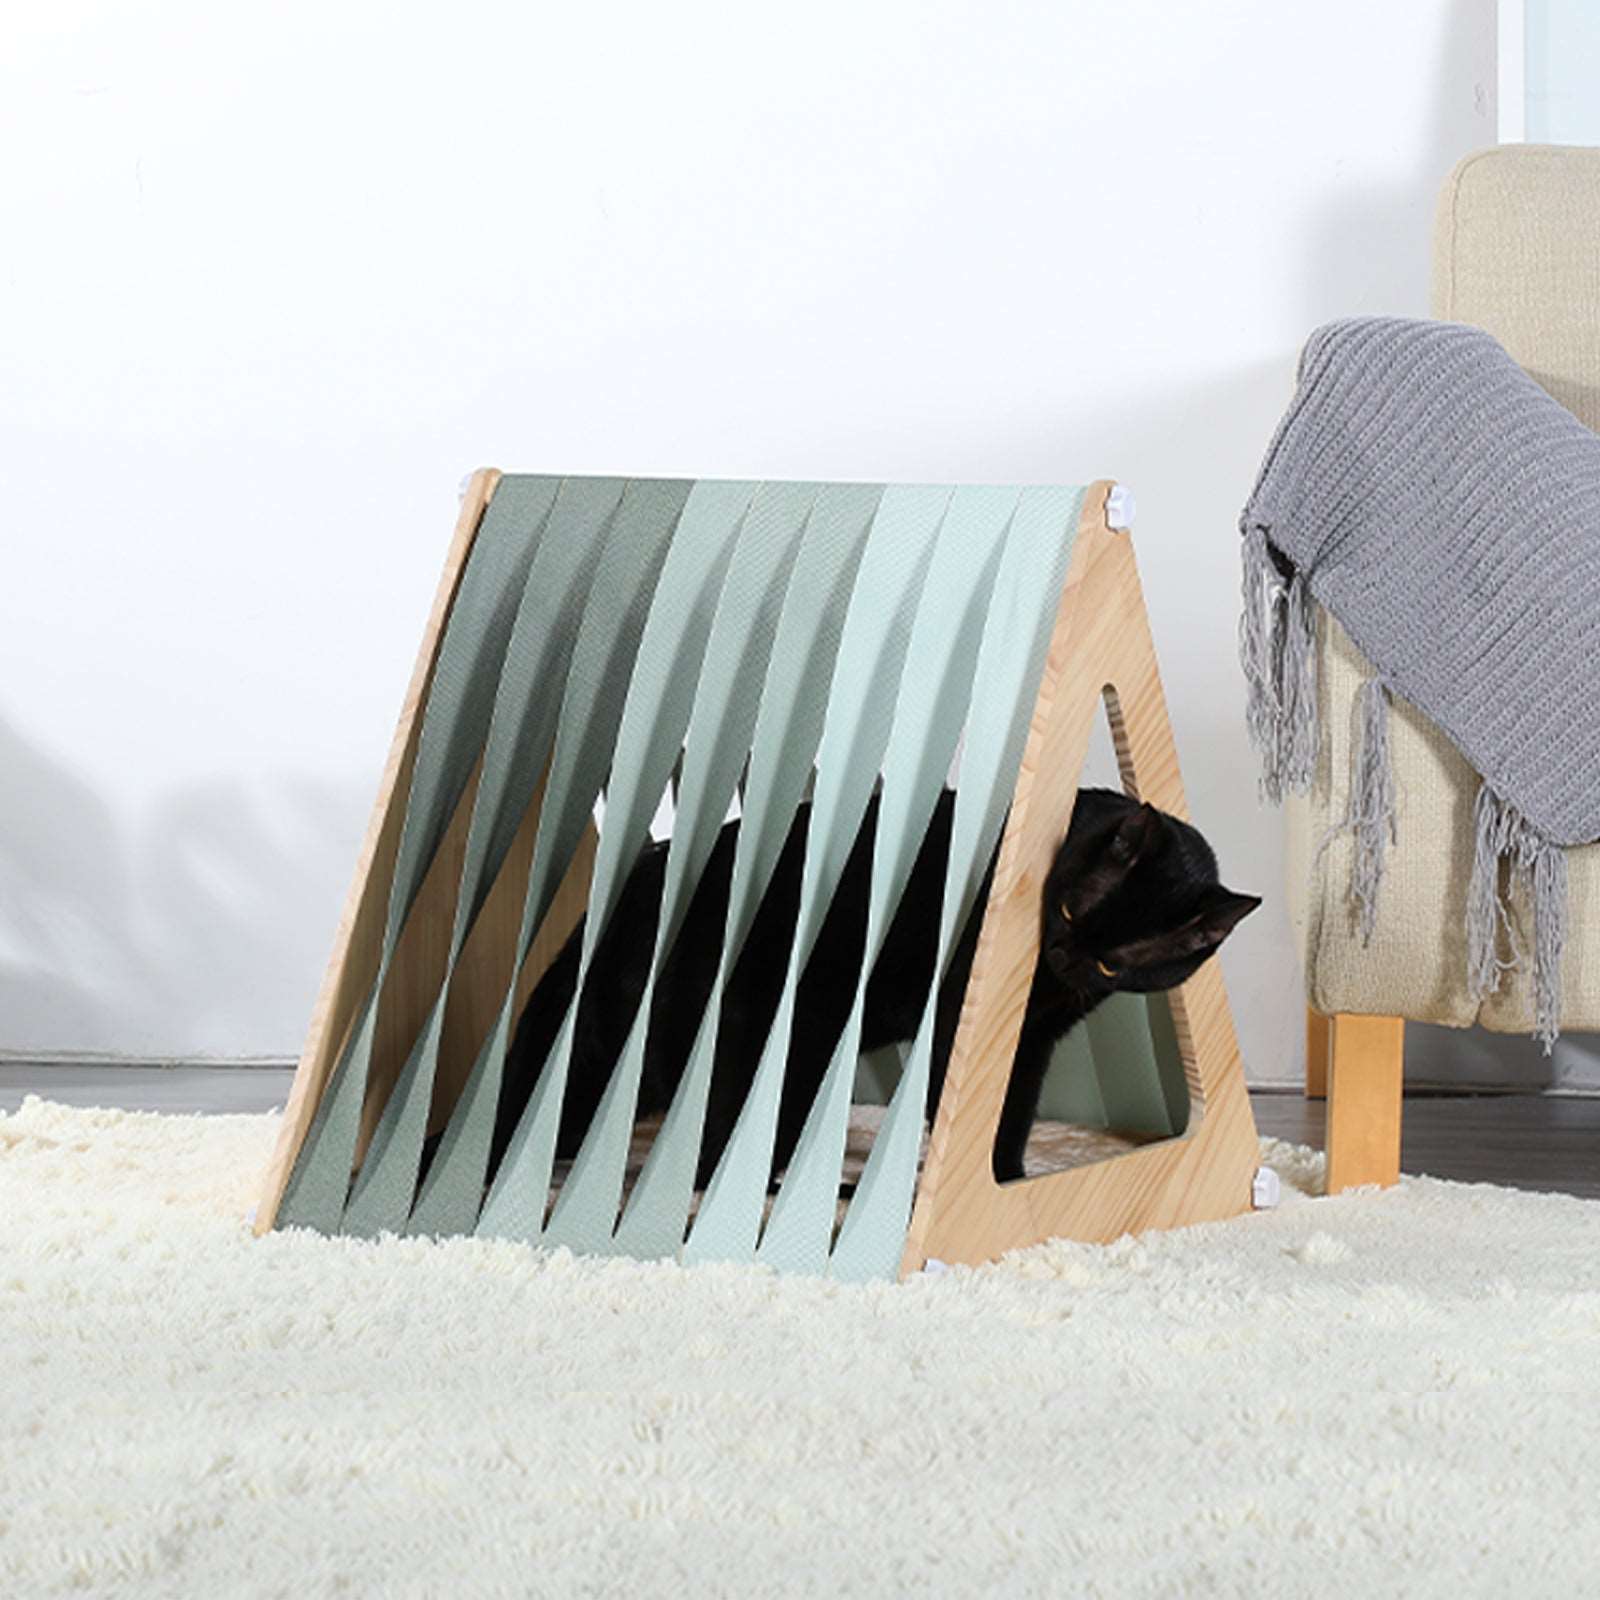 Petsfit-Modern-Style-Wood-Cat-House-with-Soft-Mat-07